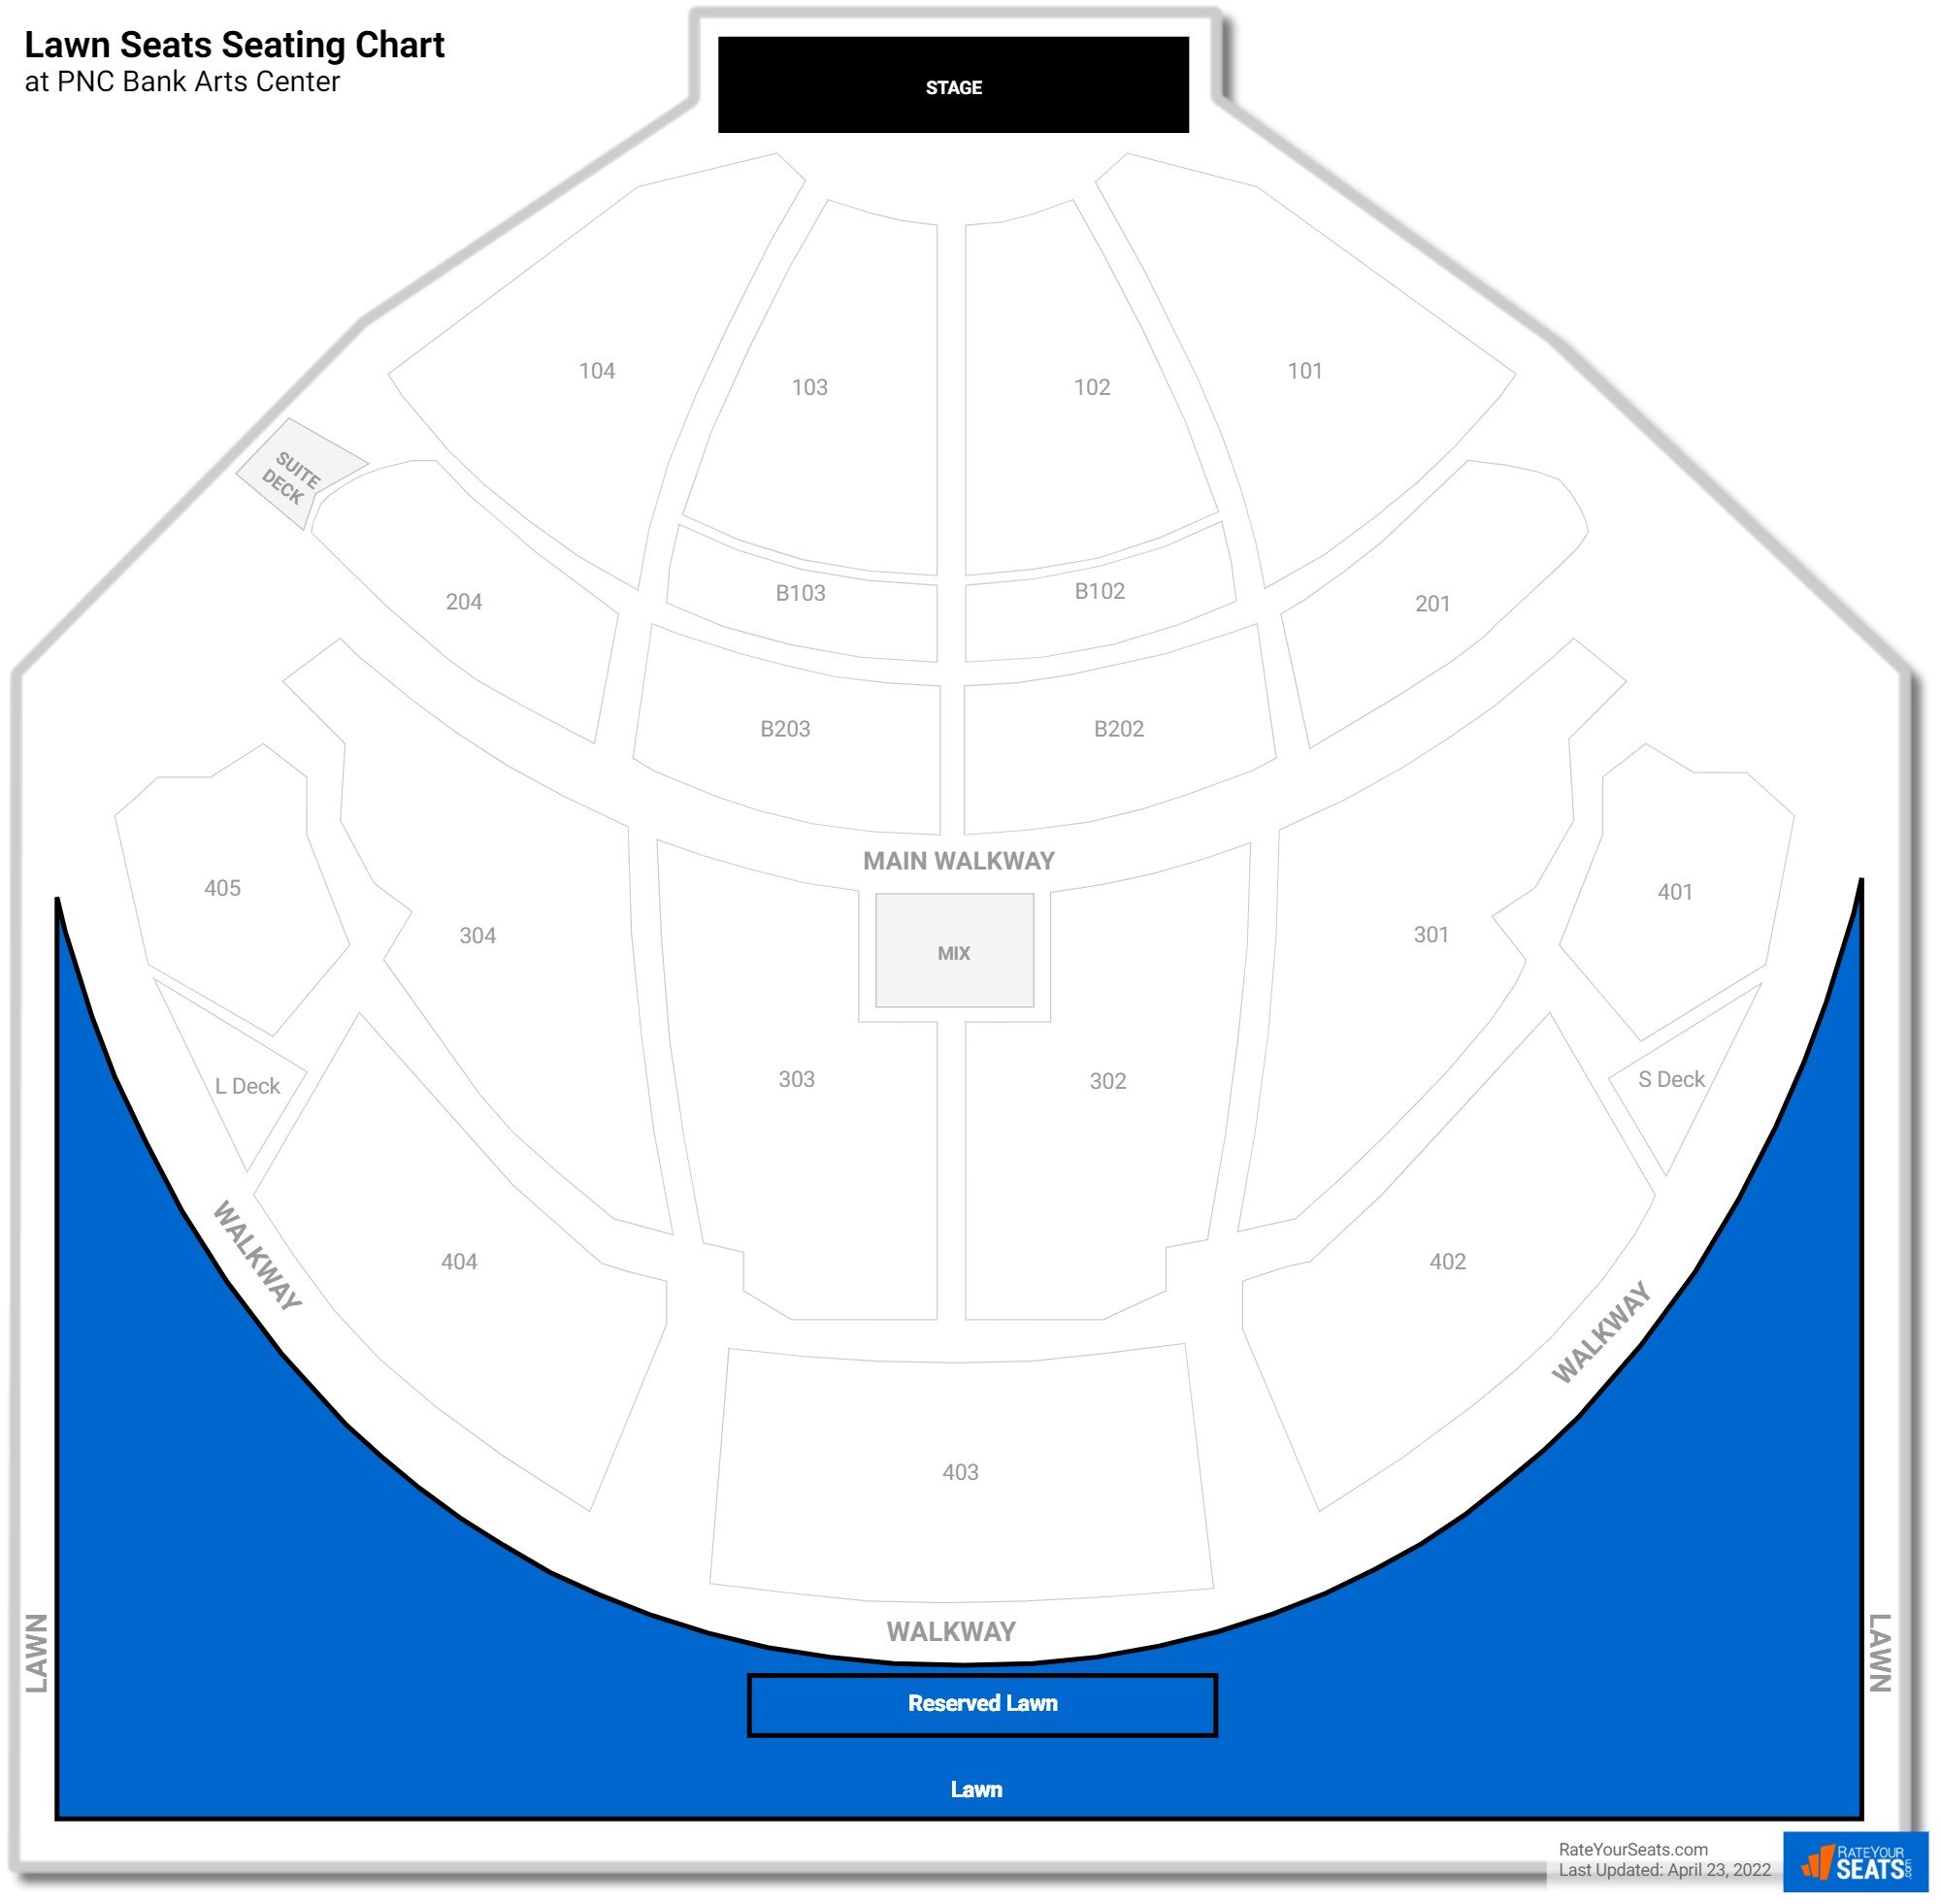 Concert Lawn Seats Seating Chart at PNC Bank Arts Center